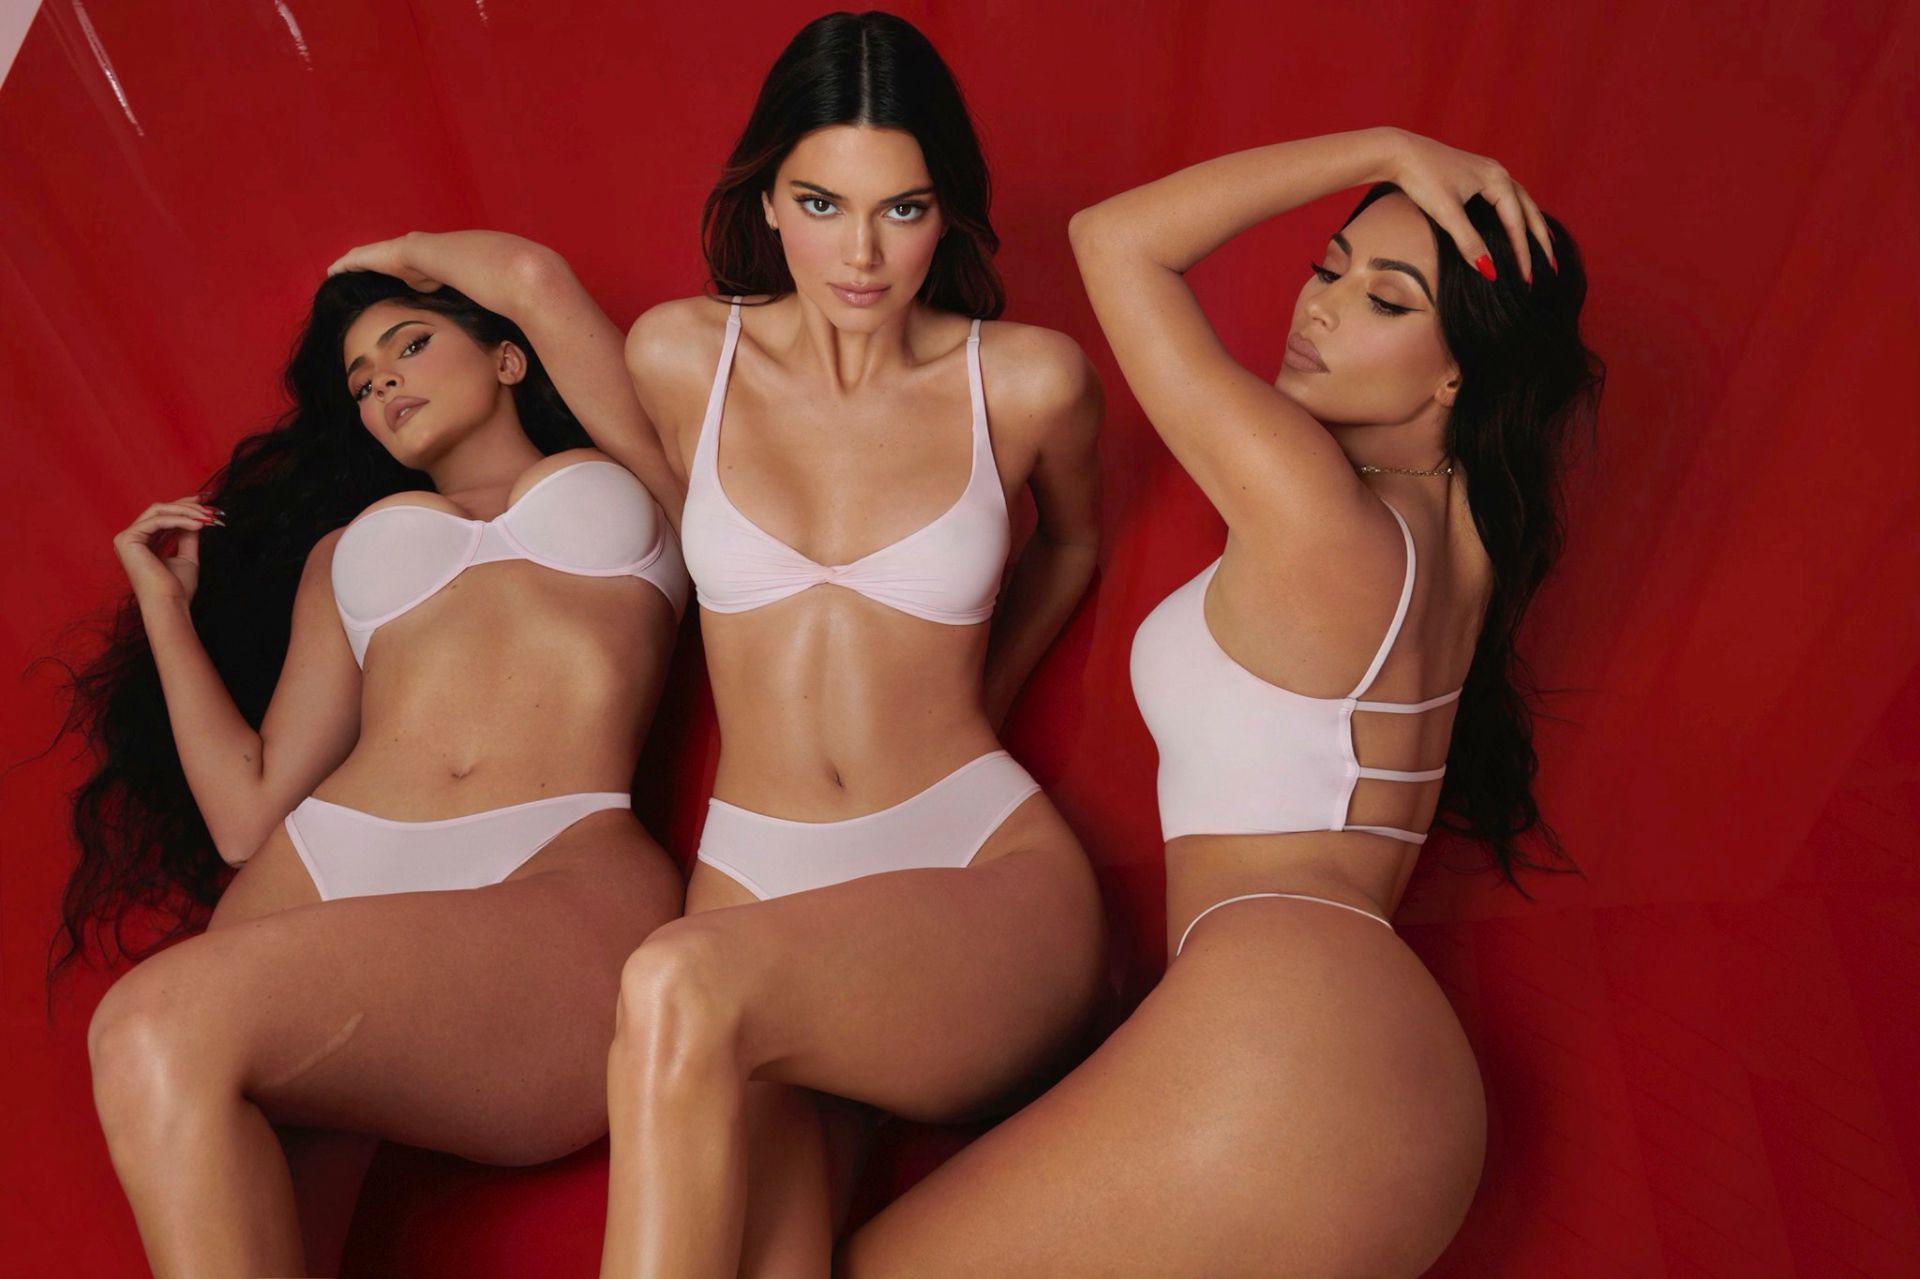 Kendall Jenner, Kylie Jenner & Kim Kardashian - Sexy Bodies in a Hot Ph...